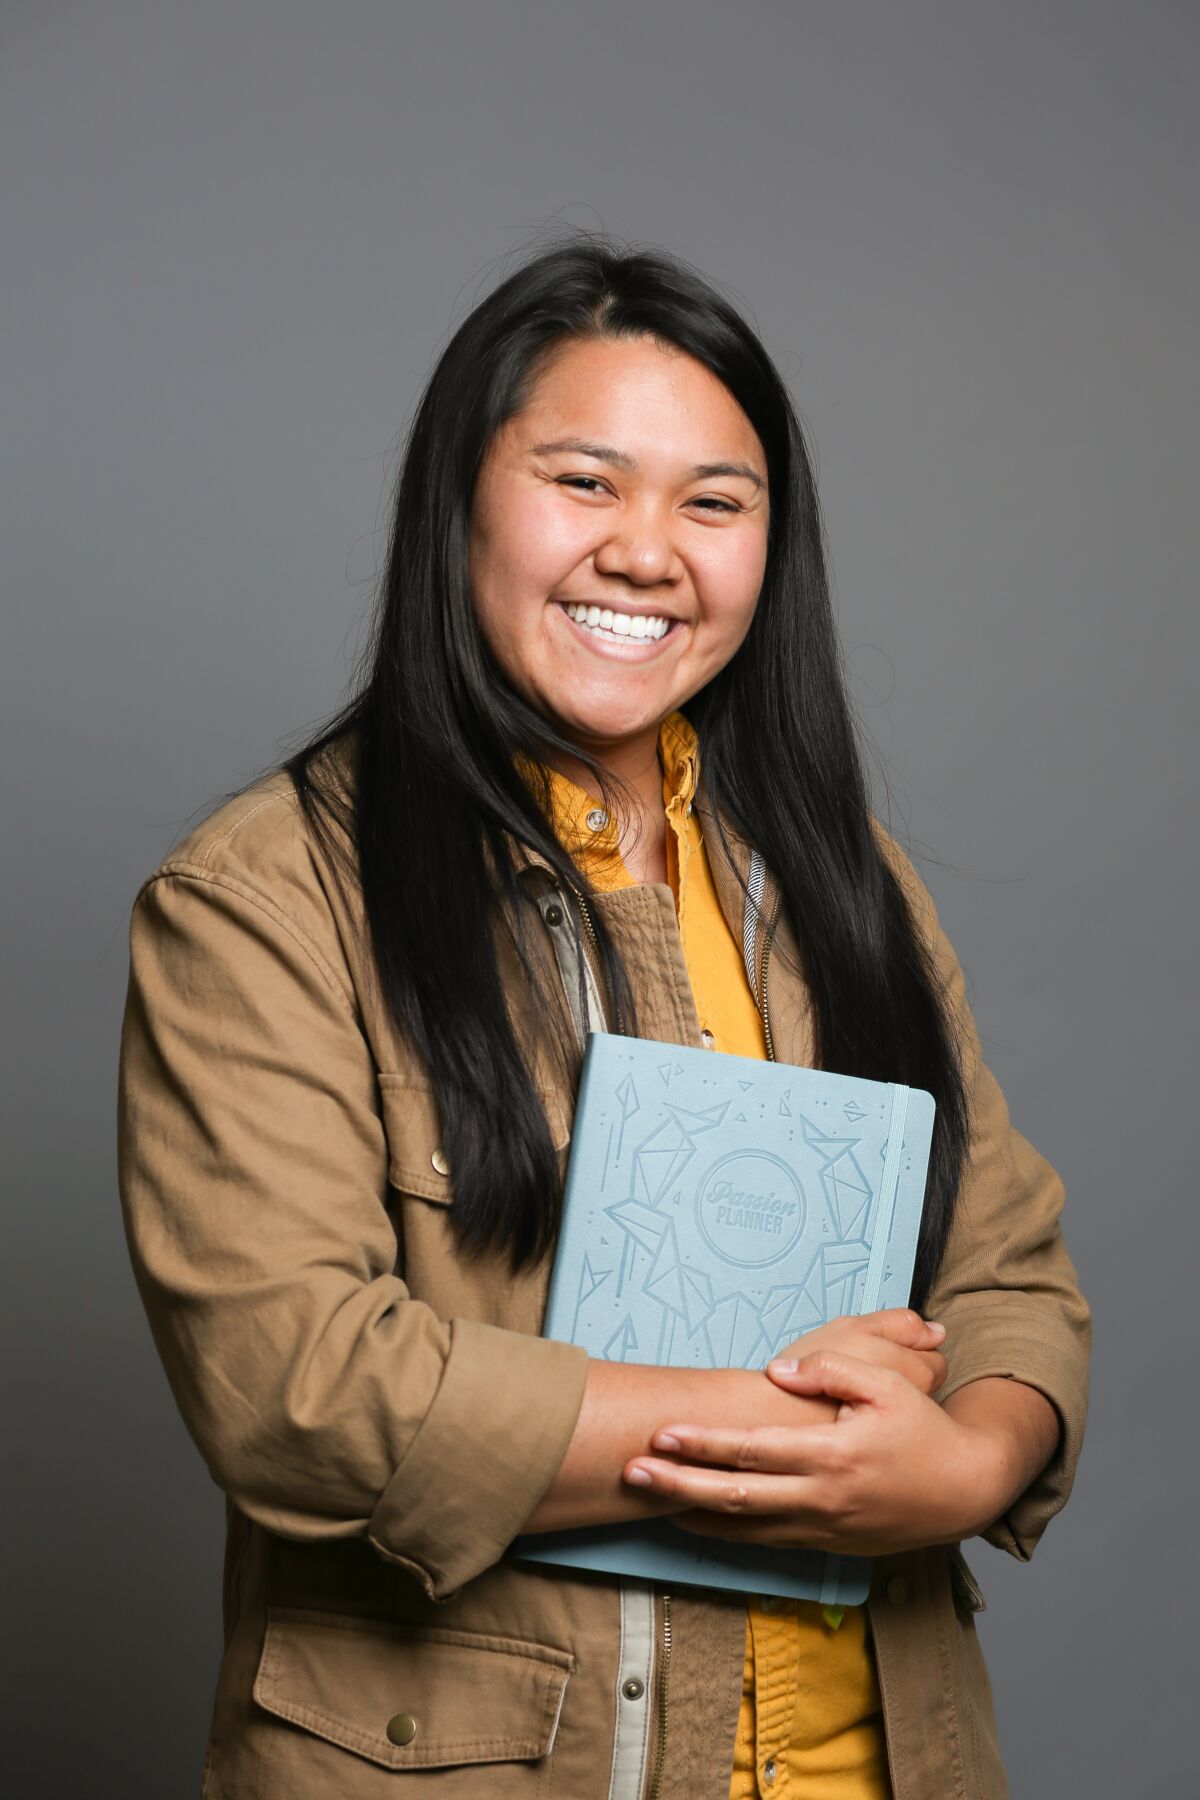 Angelia Trinidad, San Diego native and founder of Passion Planner, holds one of her planners